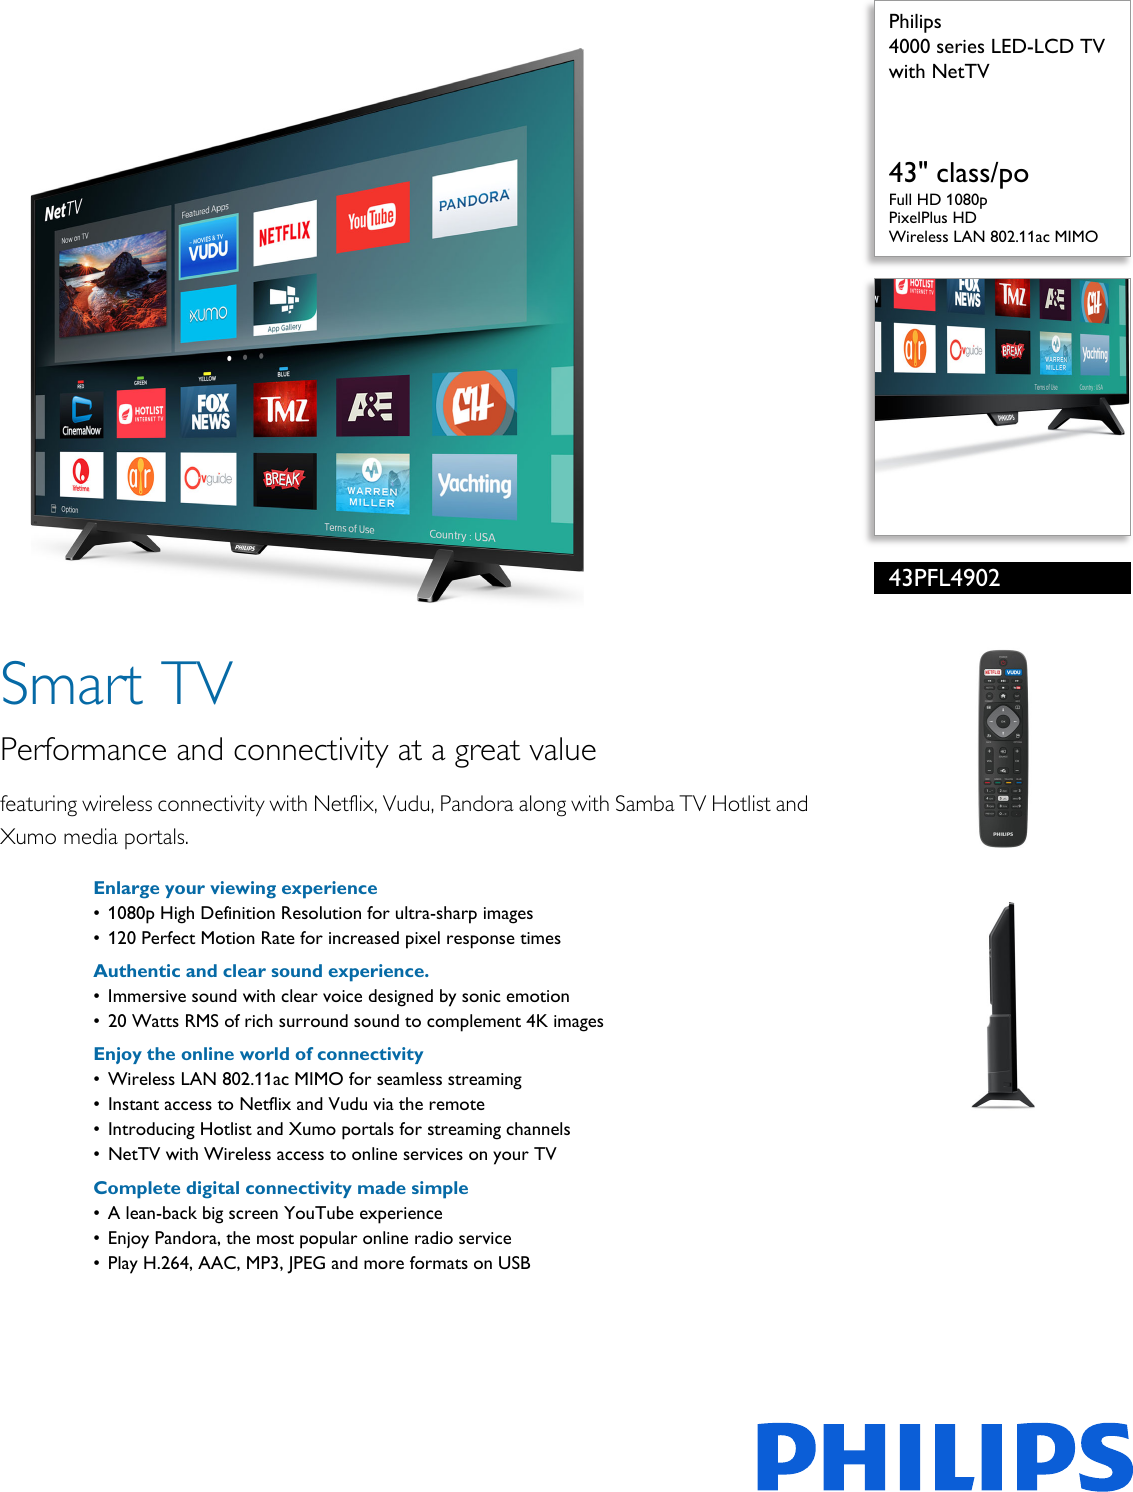 Page 1 of 3 - Philips 43PFL4902/F7 4000 Series LED-LCD TV With NetTV User Manual Leaflet 43pfl4902 F7 Pss Aenus